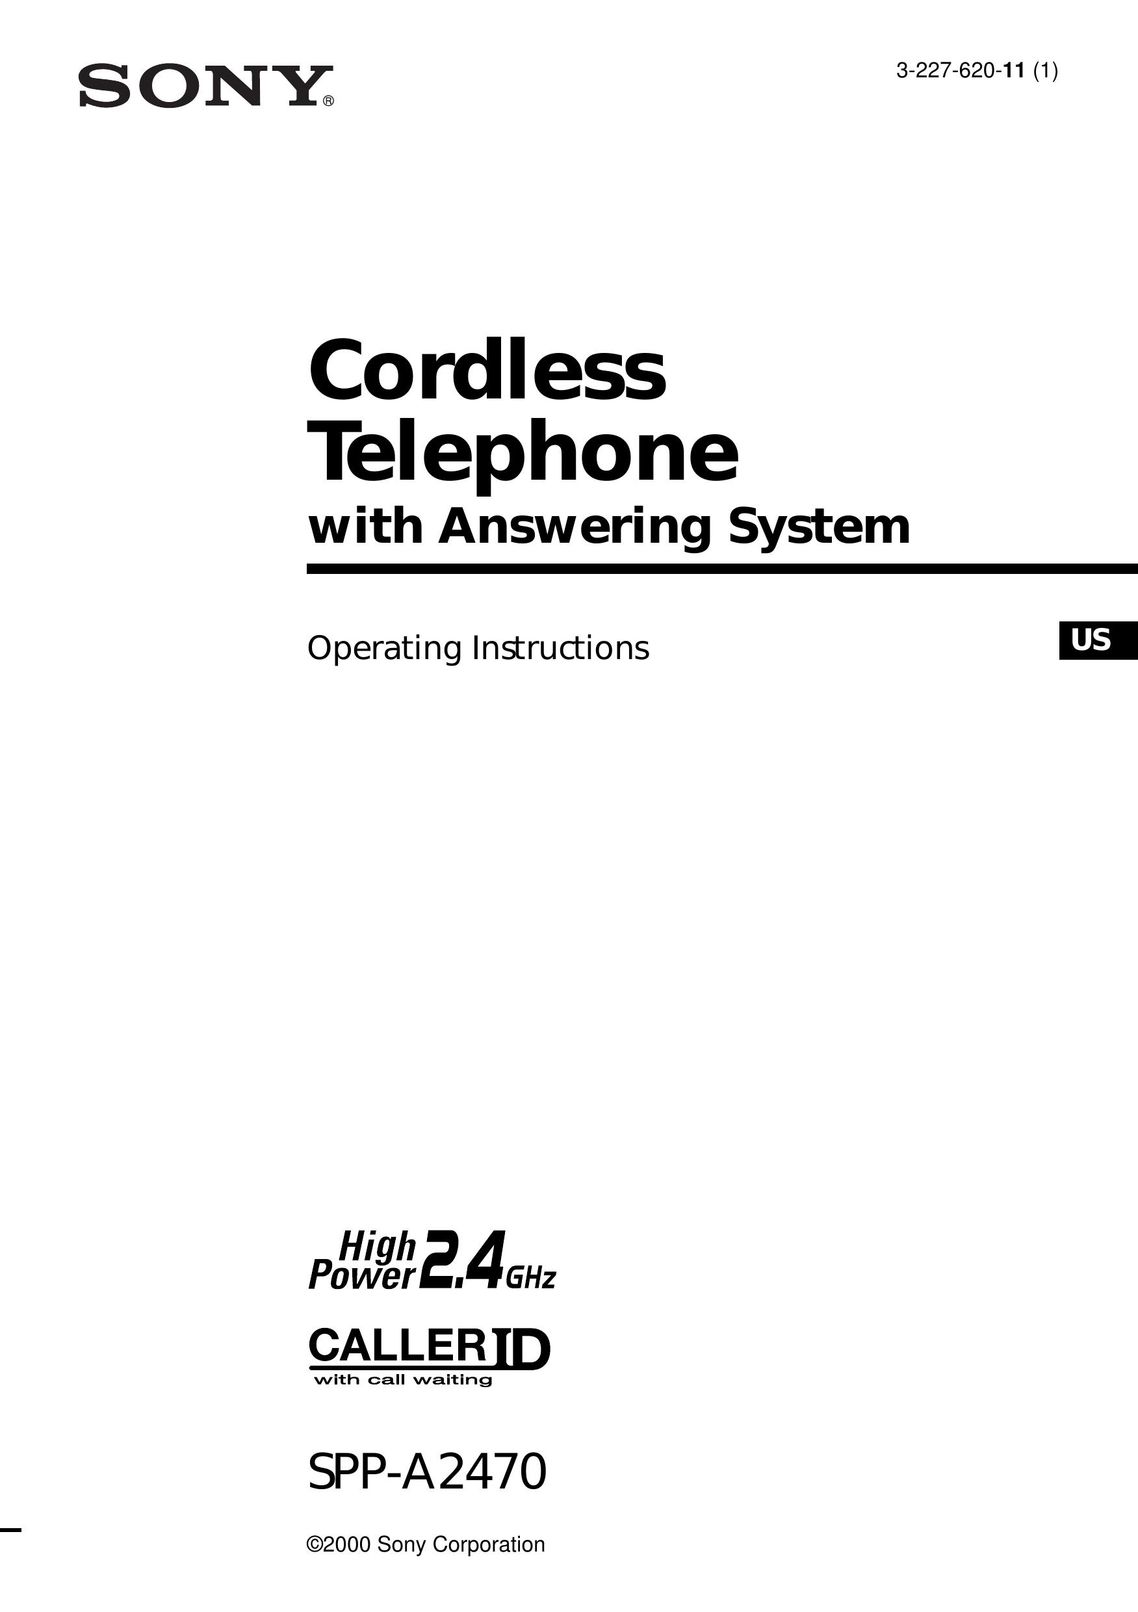 Sony SPP-A2470 Cordless Telephone User Manual